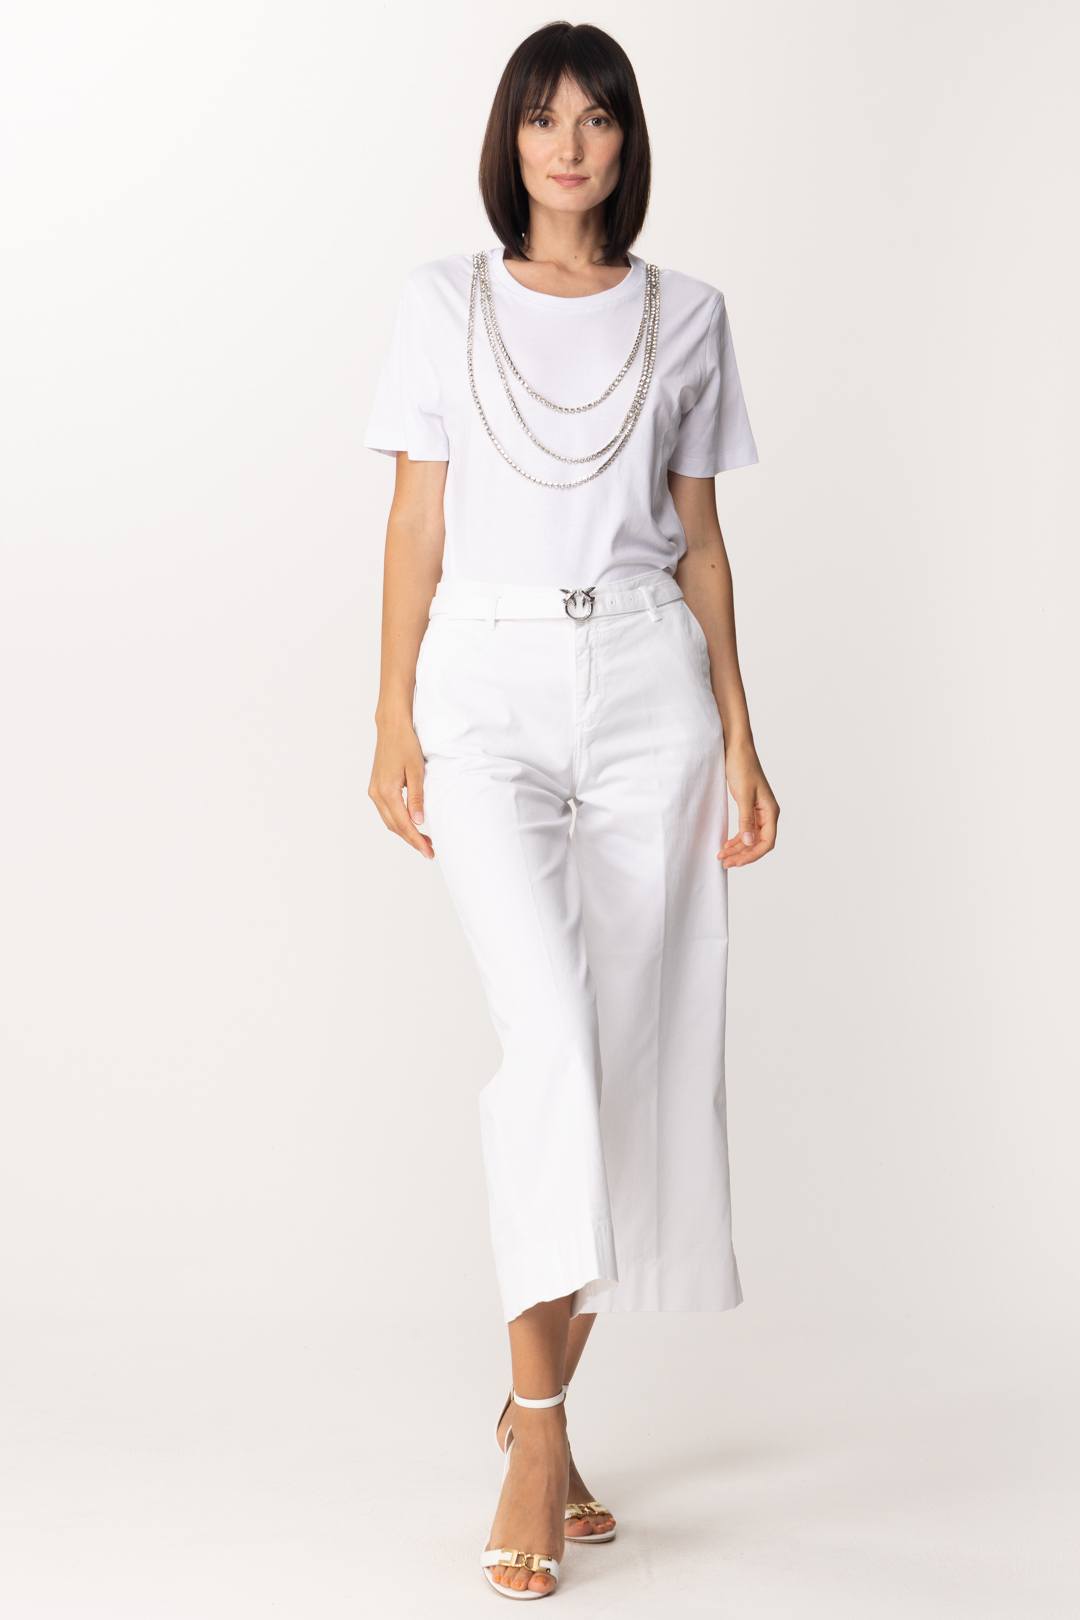 Preview: Gaelle Paris Tshirt with rhinestone necklace Bianco